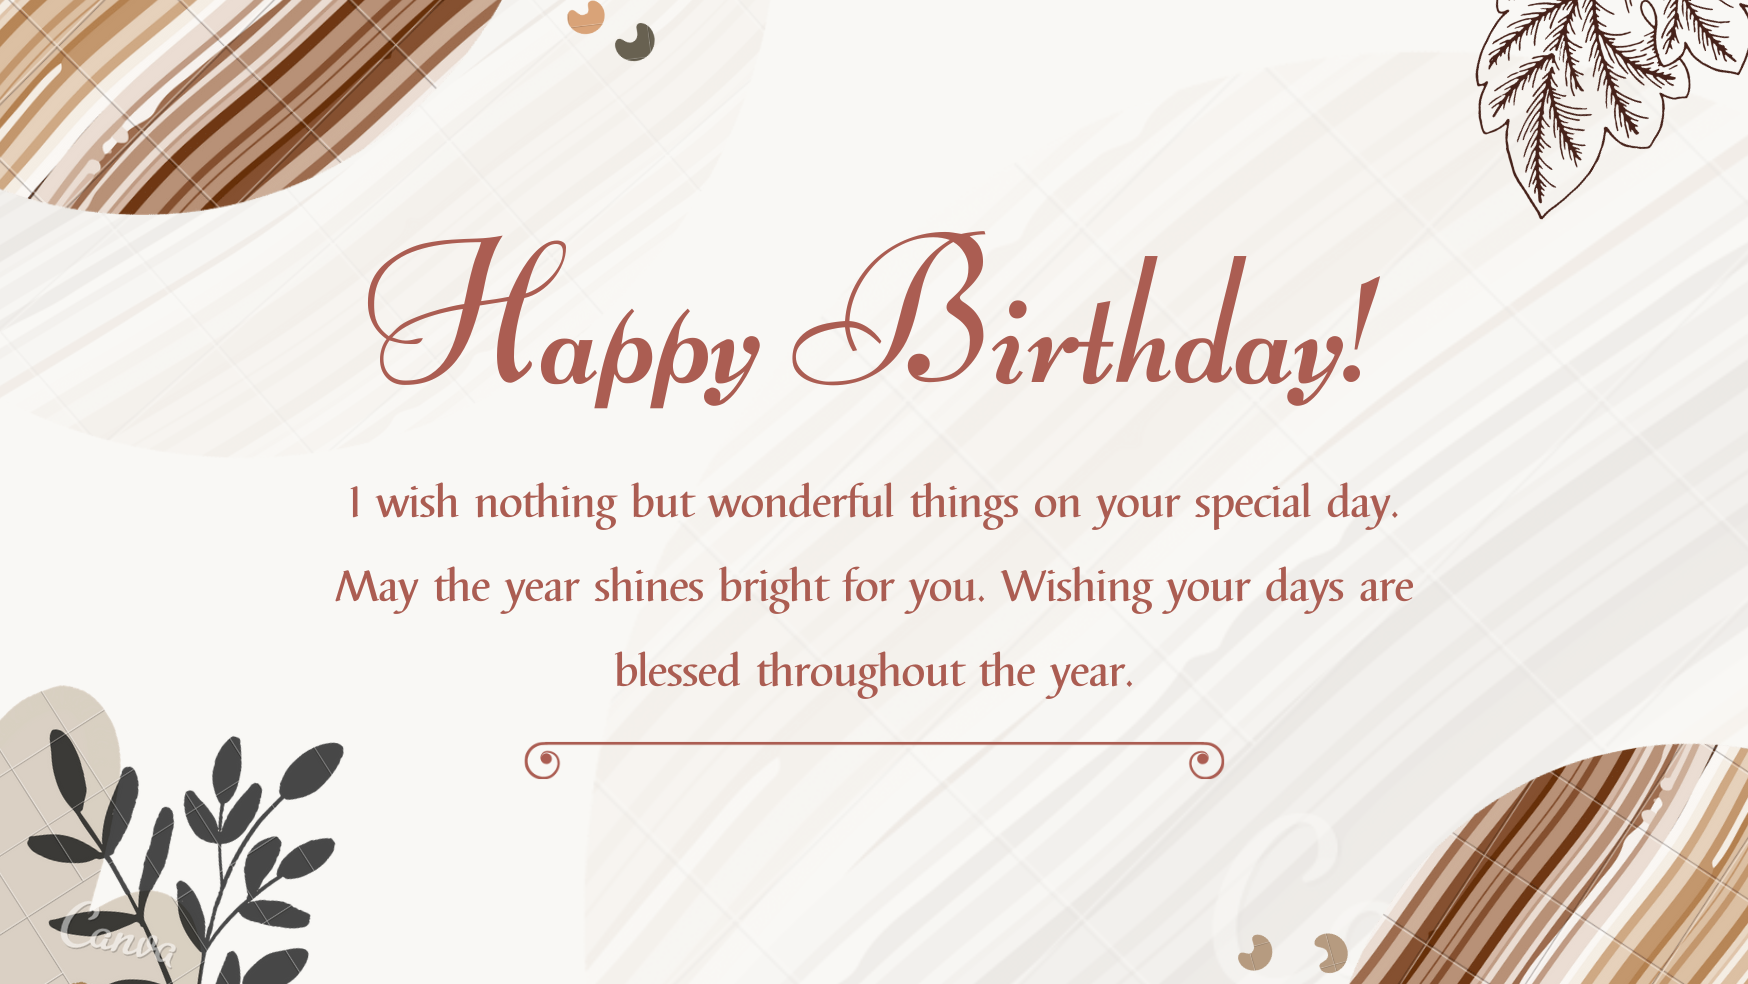 71 Happy Birthday Wishes, Quotes, and Messages - Artmall Gift Shop